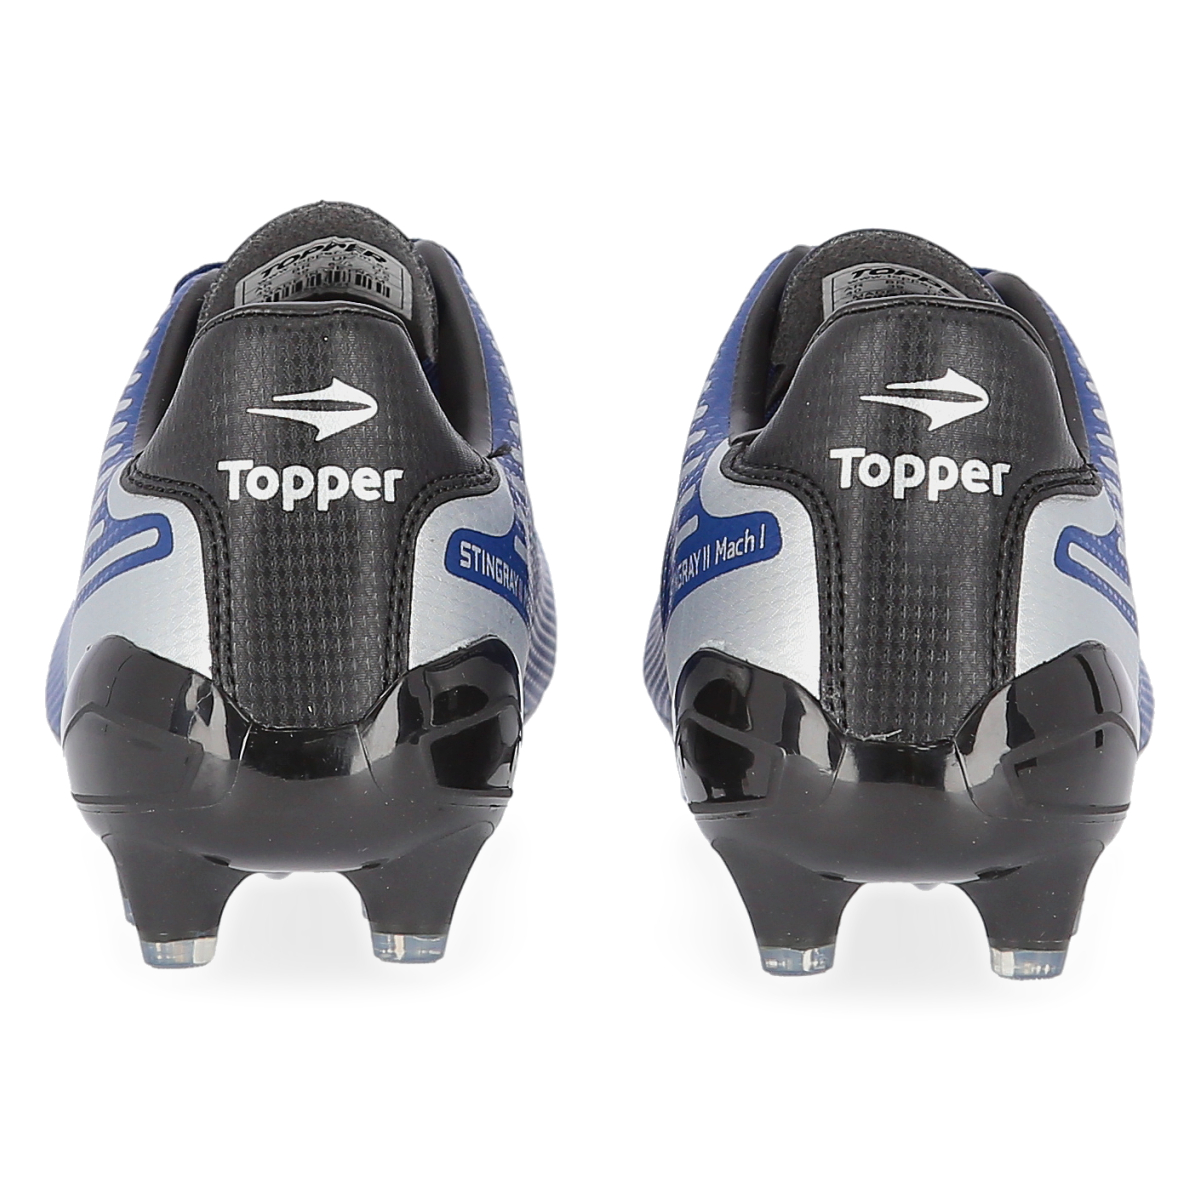 Botines Fútbol Topper Stingray Ii Mach 1 Fg Hombre,  image number null